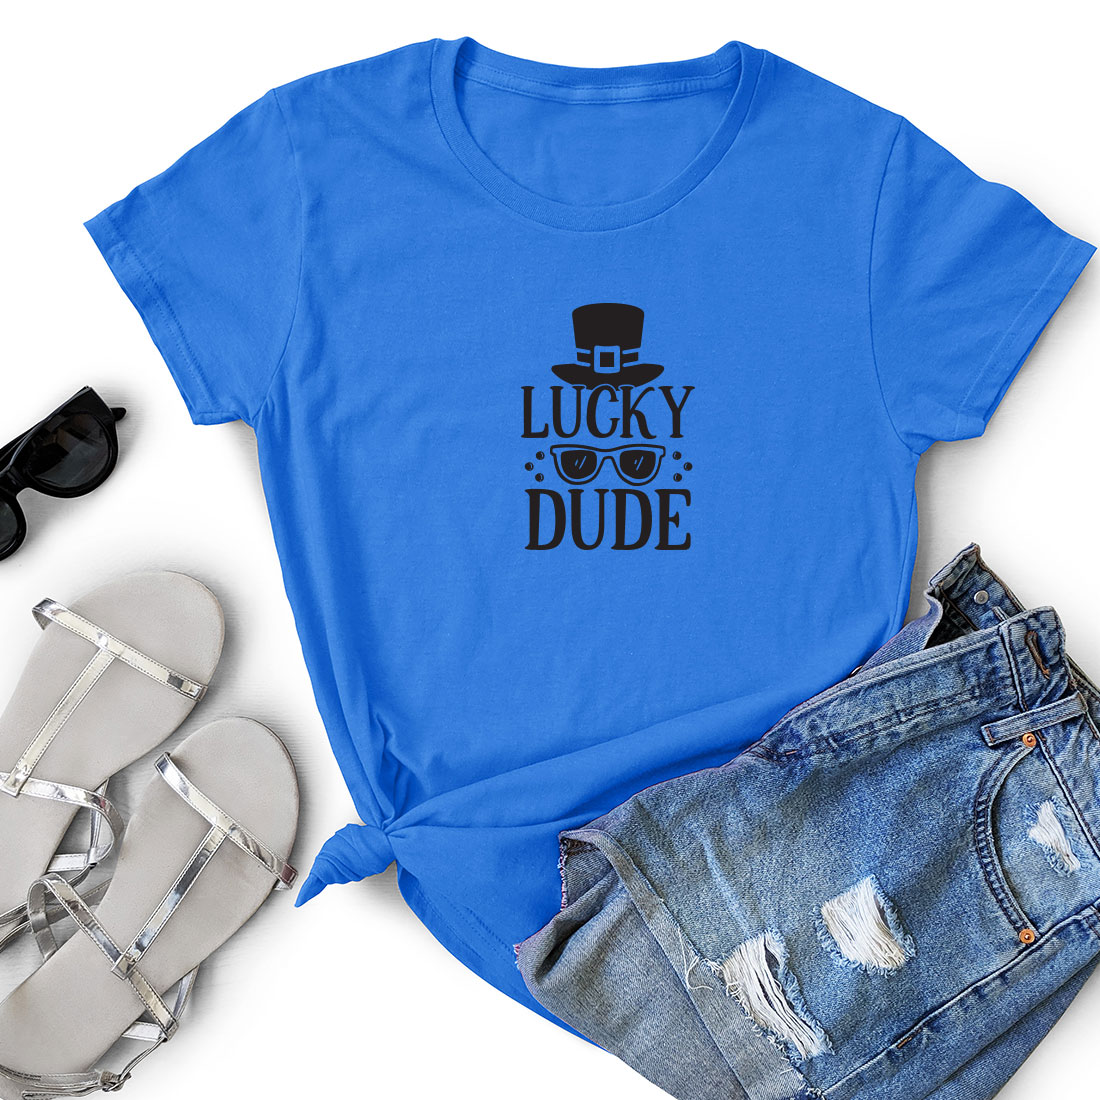 T - shirt that says lucky dude with a top hat and glasses.